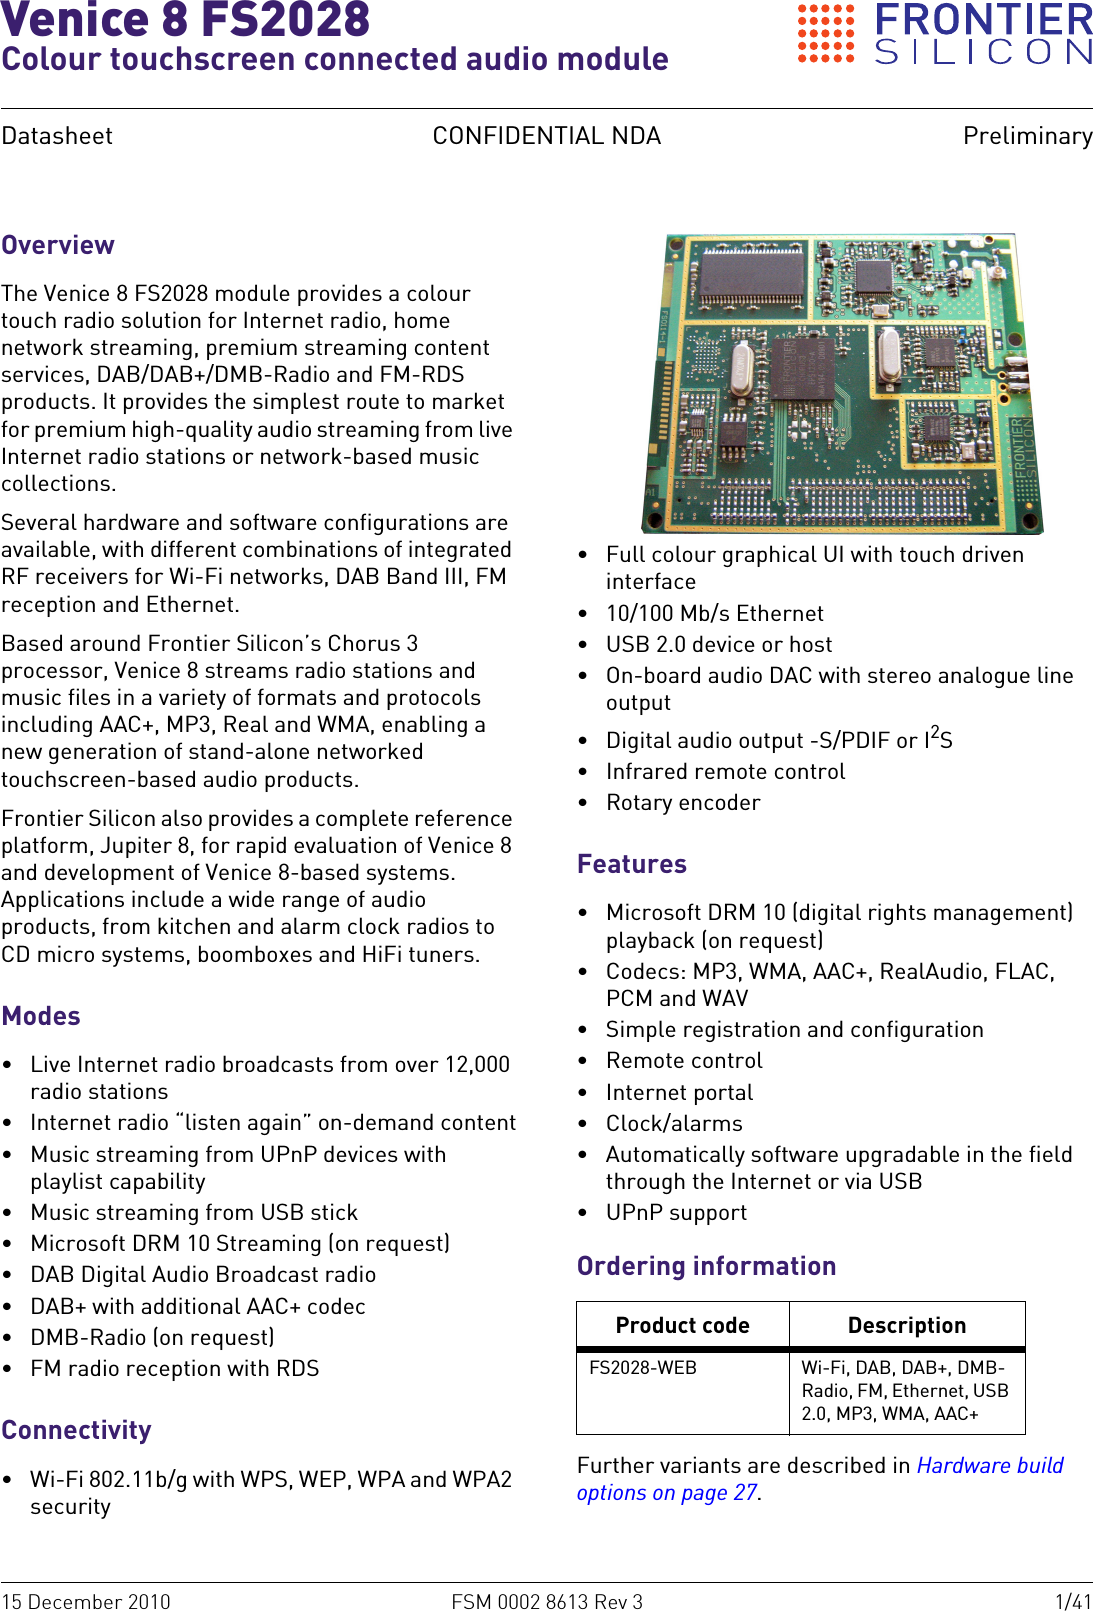 15 December 2010 FSM 0002 8613 Rev 3 1/41Datasheet CONFIDENTIAL NDA PreliminaryVenice 8 FS2028Colour touchscreen connected audio moduleOverviewThe Venice 8 FS2028 module provides a colour touch radio solution for Internet radio, home network streaming, premium streaming content services, DAB/DAB+/DMB-Radio and FM-RDS products. It provides the simplest route to market for premium high-quality audio streaming from live Internet radio stations or network-based music collections.Several hardware and software configurations are available, with different combinations of integrated RF receivers for Wi-Fi networks, DAB Band III, FM reception and Ethernet.Based around Frontier Silicon’s Chorus 3 processor, Venice 8 streams radio stations and music files in a variety of formats and protocols including AAC+, MP3, Real and WMA, enabling a new generation of stand-alone networked touchscreen-based audio products.Frontier Silicon also provides a complete reference platform, Jupiter 8, for rapid evaluation of Venice 8 and development of Venice 8-based systems. Applications include a wide range of audio products, from kitchen and alarm clock radios to CD micro systems, boomboxes and HiFi tuners.Modes• Live Internet radio broadcasts from over 12,000 radio stations• Internet radio “listen again” on-demand content• Music streaming from UPnP devices with playlist capability• Music streaming from USB stick• Microsoft DRM 10 Streaming (on request)• DAB Digital Audio Broadcast radio• DAB+ with additional AAC+ codec•DMB-Radio (on request)• FM radio reception with RDSConnectivity• Wi-Fi 802.11b/g with WPS, WEP, WPA and WPA2 security• Full colour graphical UI with touch driven interface• 10/100 Mb/s Ethernet• USB 2.0 device or host• On-board audio DAC with stereo analogue line output• Digital audio output -S/PDIF or I2S• Infrared remote control• Rotary encoderFeatures• Microsoft DRM 10 (digital rights management) playback (on request)• Codecs: MP3, WMA, AAC+, RealAudio, FLAC, PCM and WAV• Simple registration and configuration• Remote control•Internet portal•Clock/alarms• Automatically software upgradable in the field through the Internet or via USB• UPnP supportOrdering informationFurther variants are described in Hardware build options on page 27.Product code DescriptionFS2028-WEB Wi-Fi, DAB, DAB+, DMB-Radio, FM, Ethernet, USB 2.0, MP3, WMA, AAC+